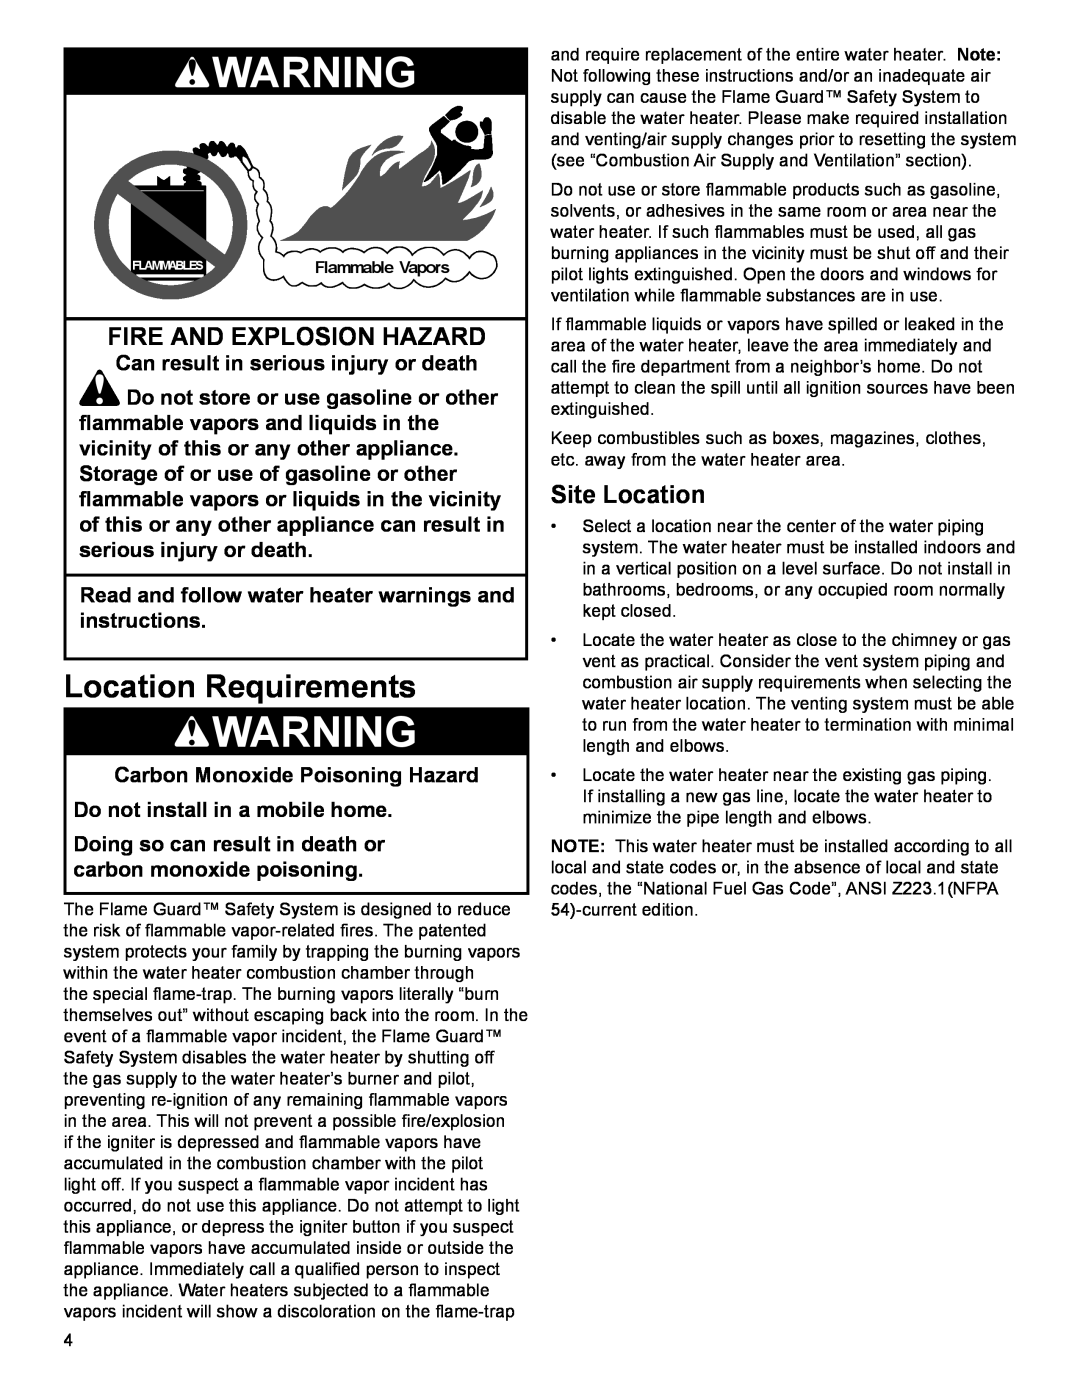 American Water Heater 318935-003 installation instructions Location Requirements, Site Location 